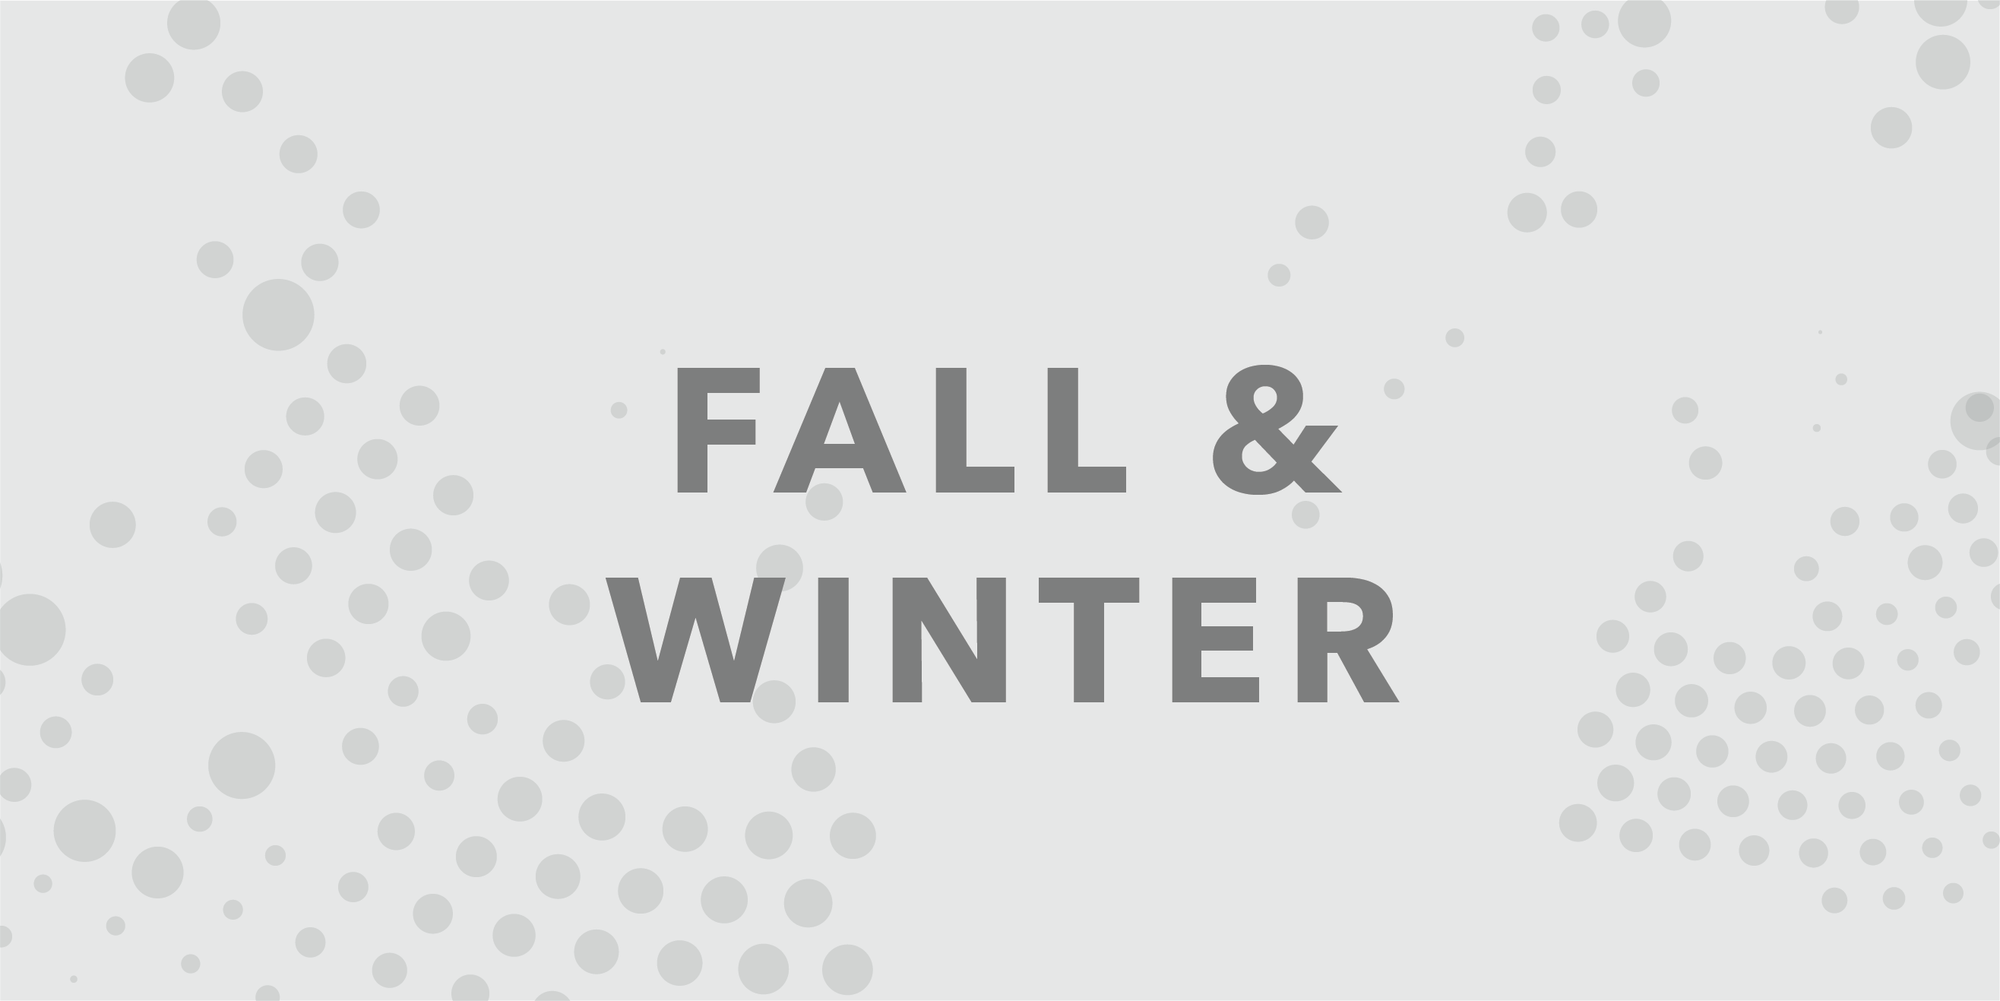 Brrr, it is getting cold out there, better cover up with our Fall & Winter Collection!